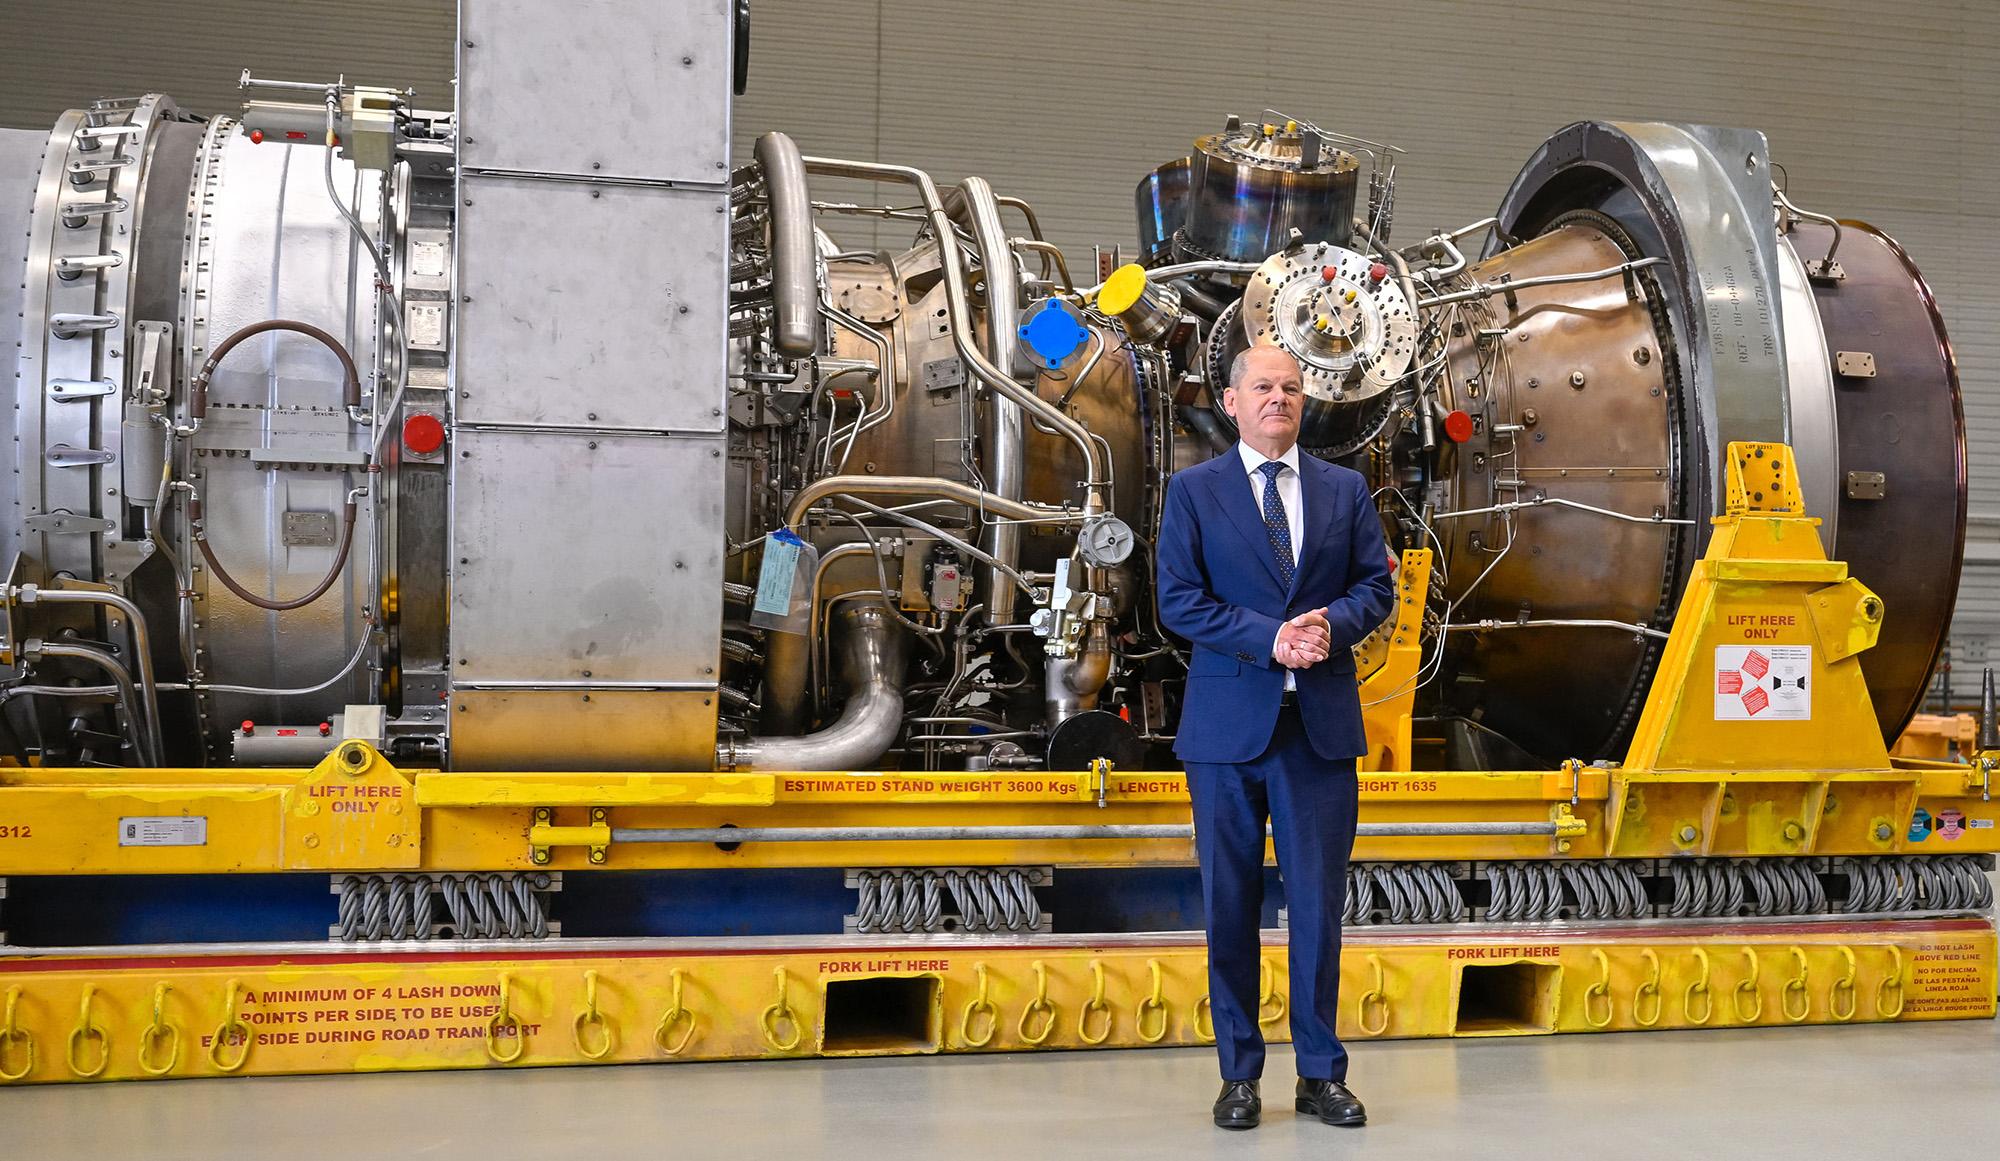 German Chancellor Olaf Scholz stands in front of a turbine of the Nord Stream 1 pipeline during a visit on August 3, to Siemens Energy in Muelheim, Germany, where the engine is stored after maintenance work in Canada.